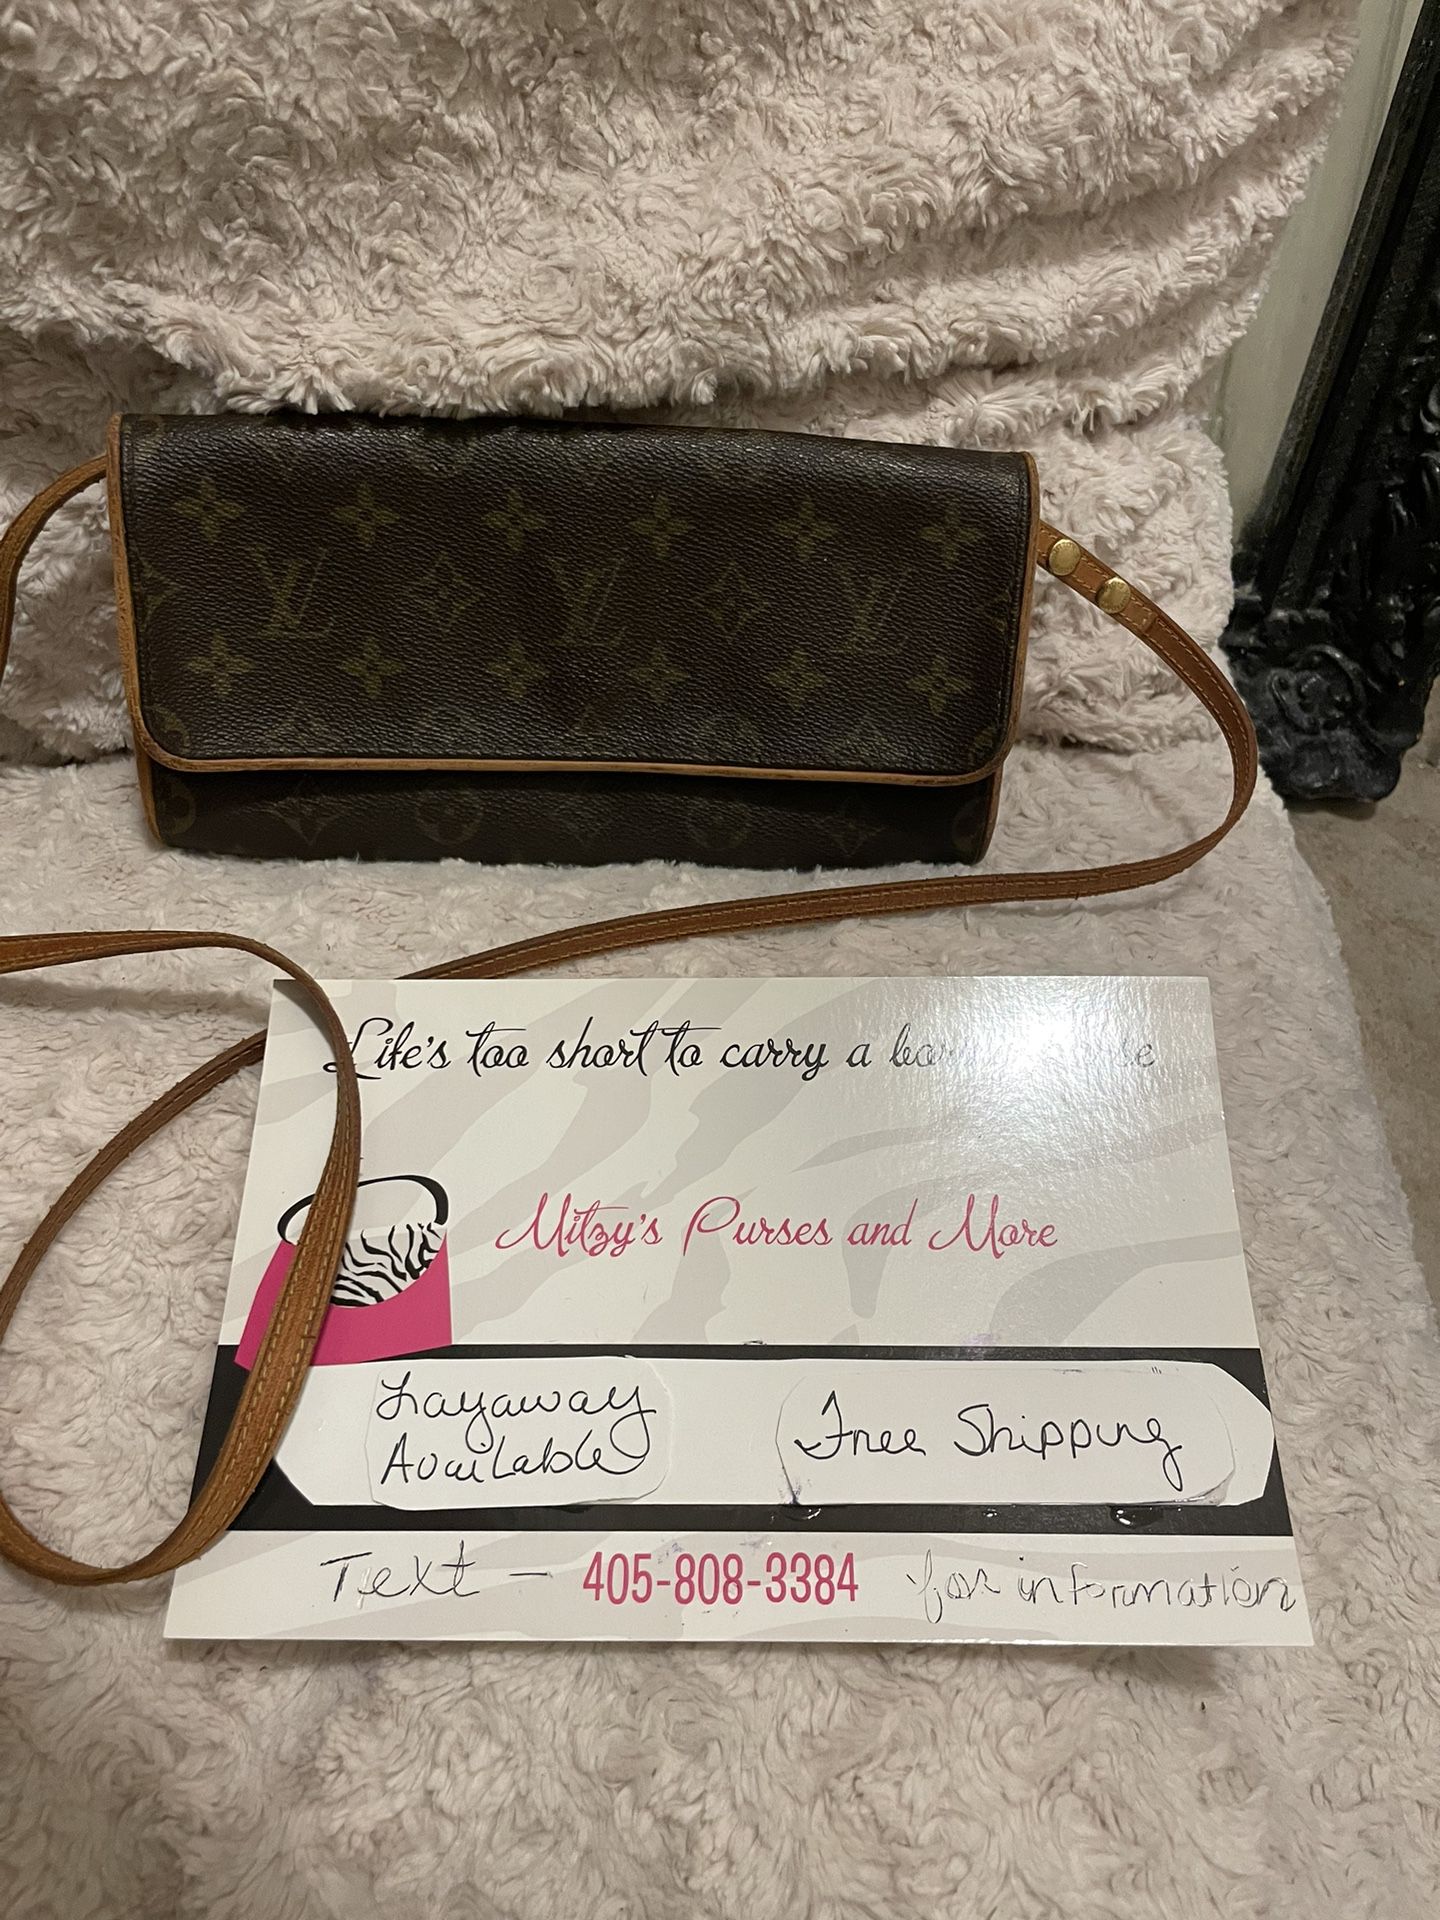 Authentic Louis Vuitton Crossbody, Clutch, Shoulder Bag Being Listed By Mitzys Purses And More